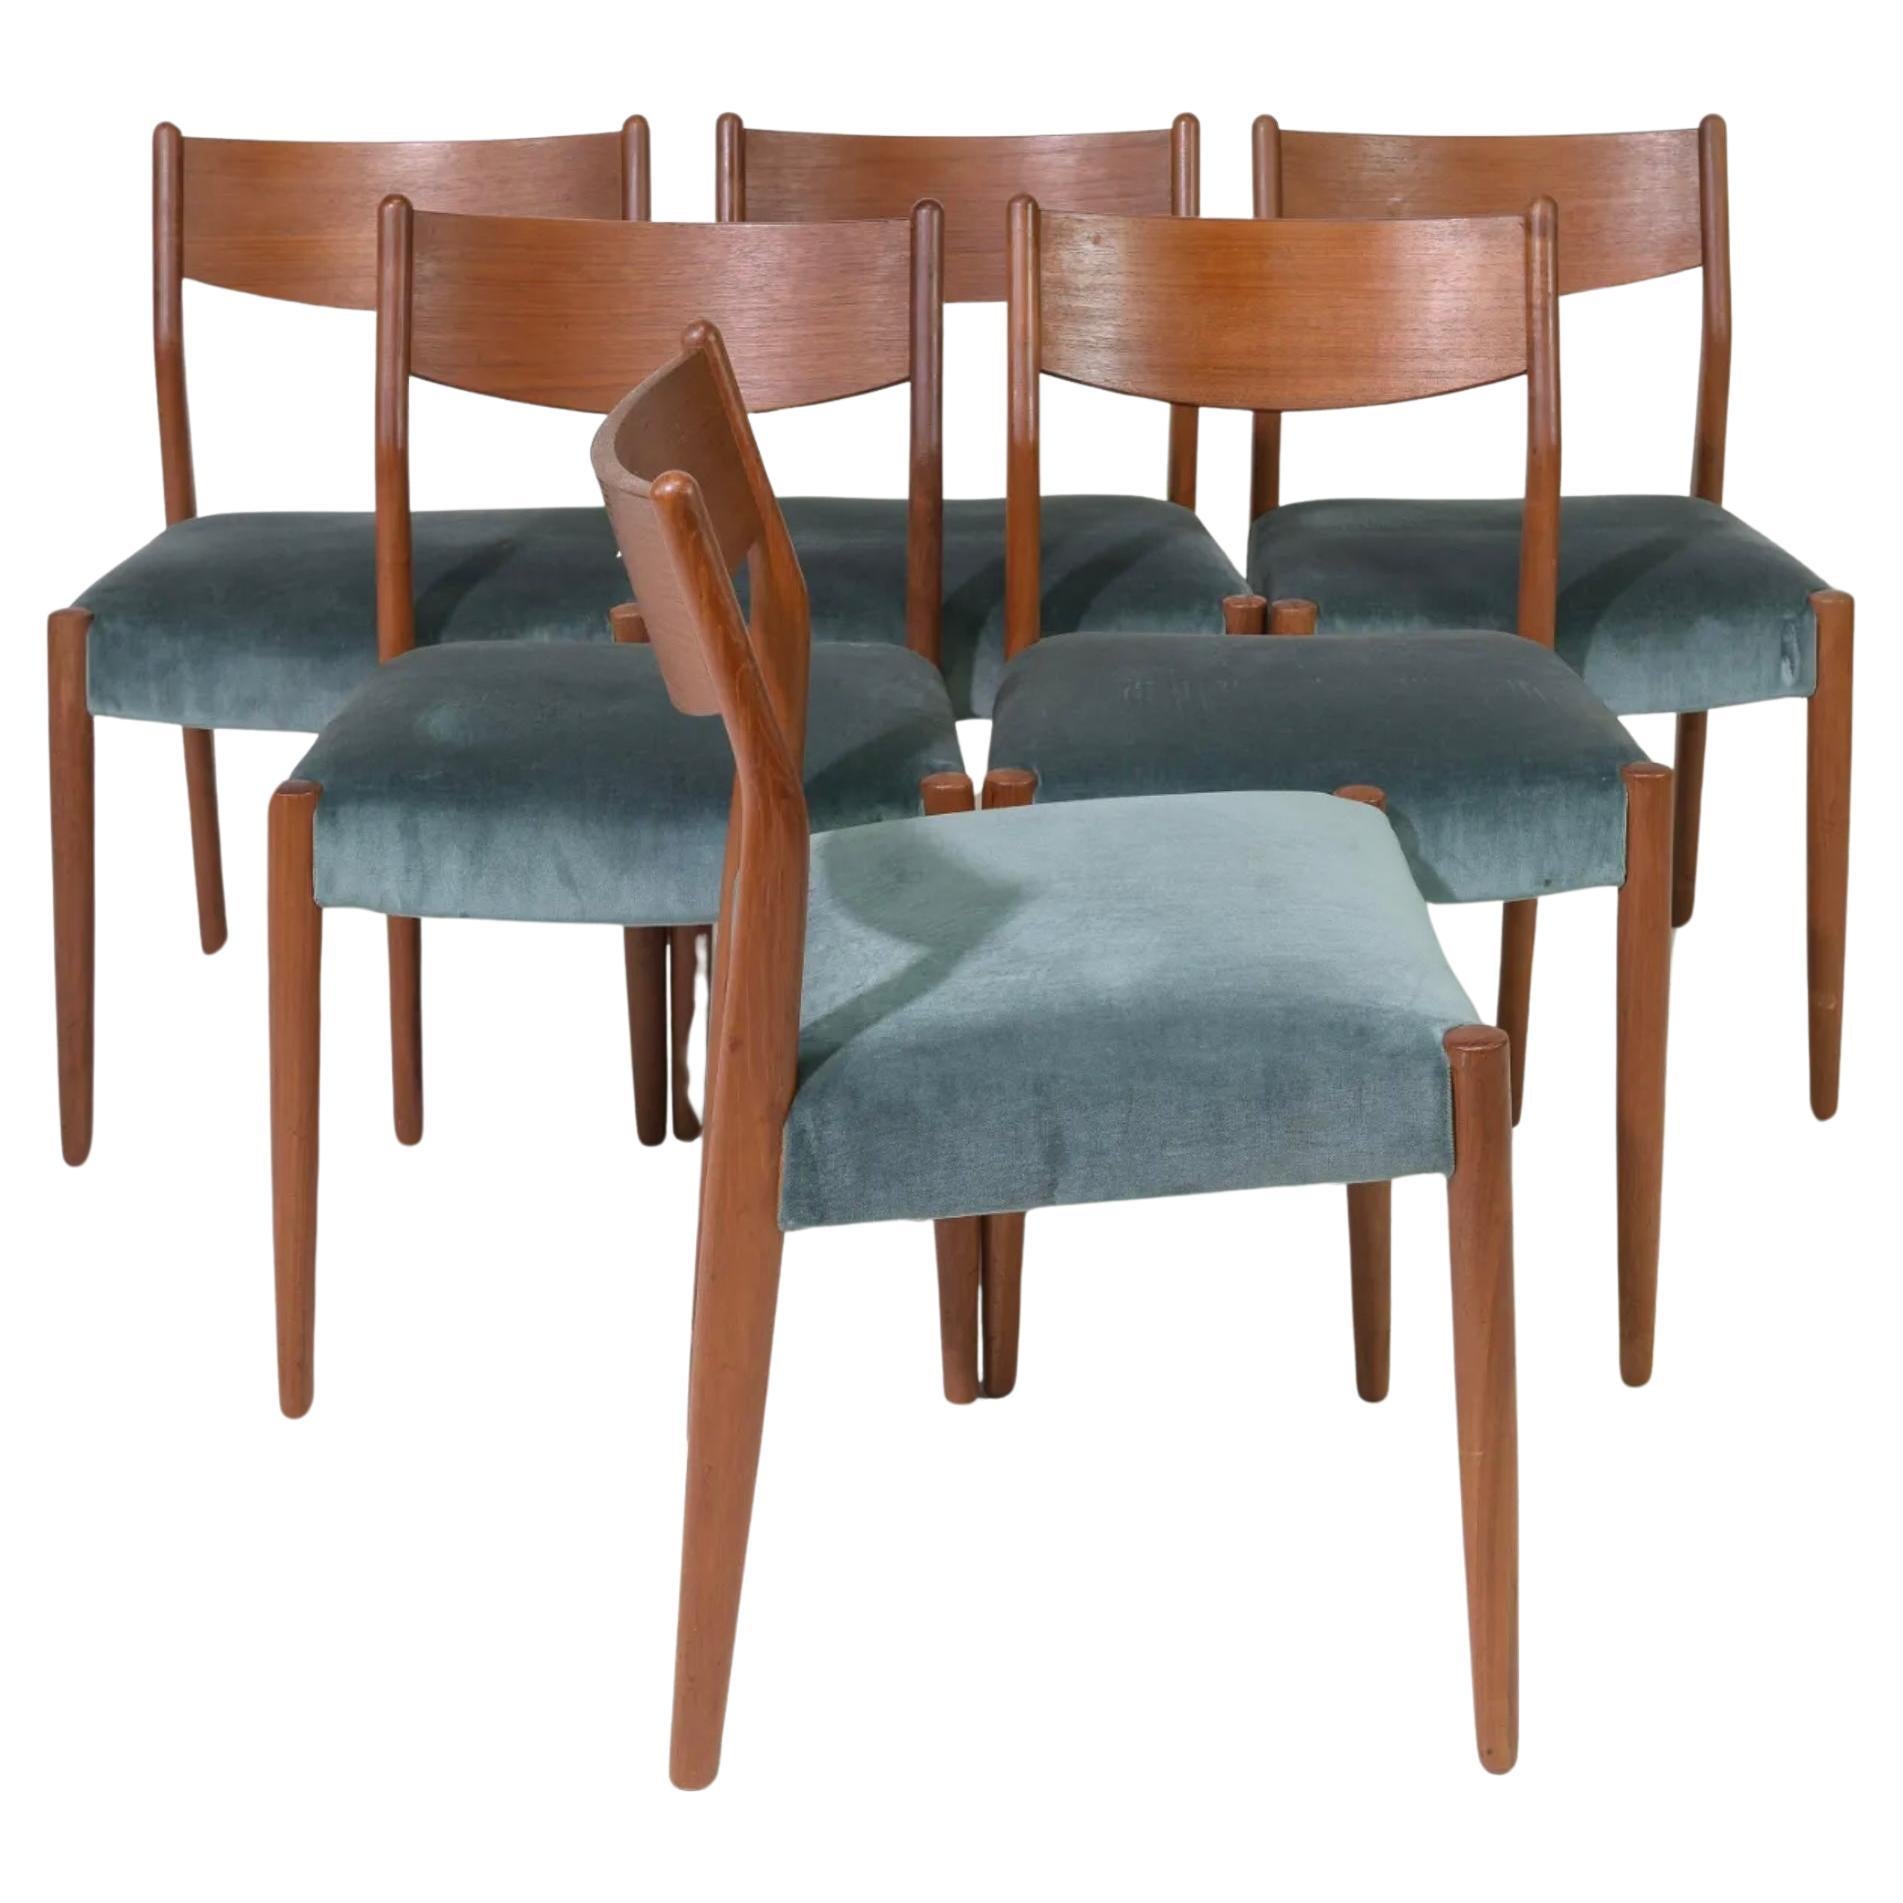 Set of 6 Danish modern teak dining chairs with mohair upholstery. Clean solid teak Danish dining chairs. Very clean set of chairs ready for use. Made in Denmark. Located in Brooklyn NYC. 

Sold as a set of (6) chairs.

 19